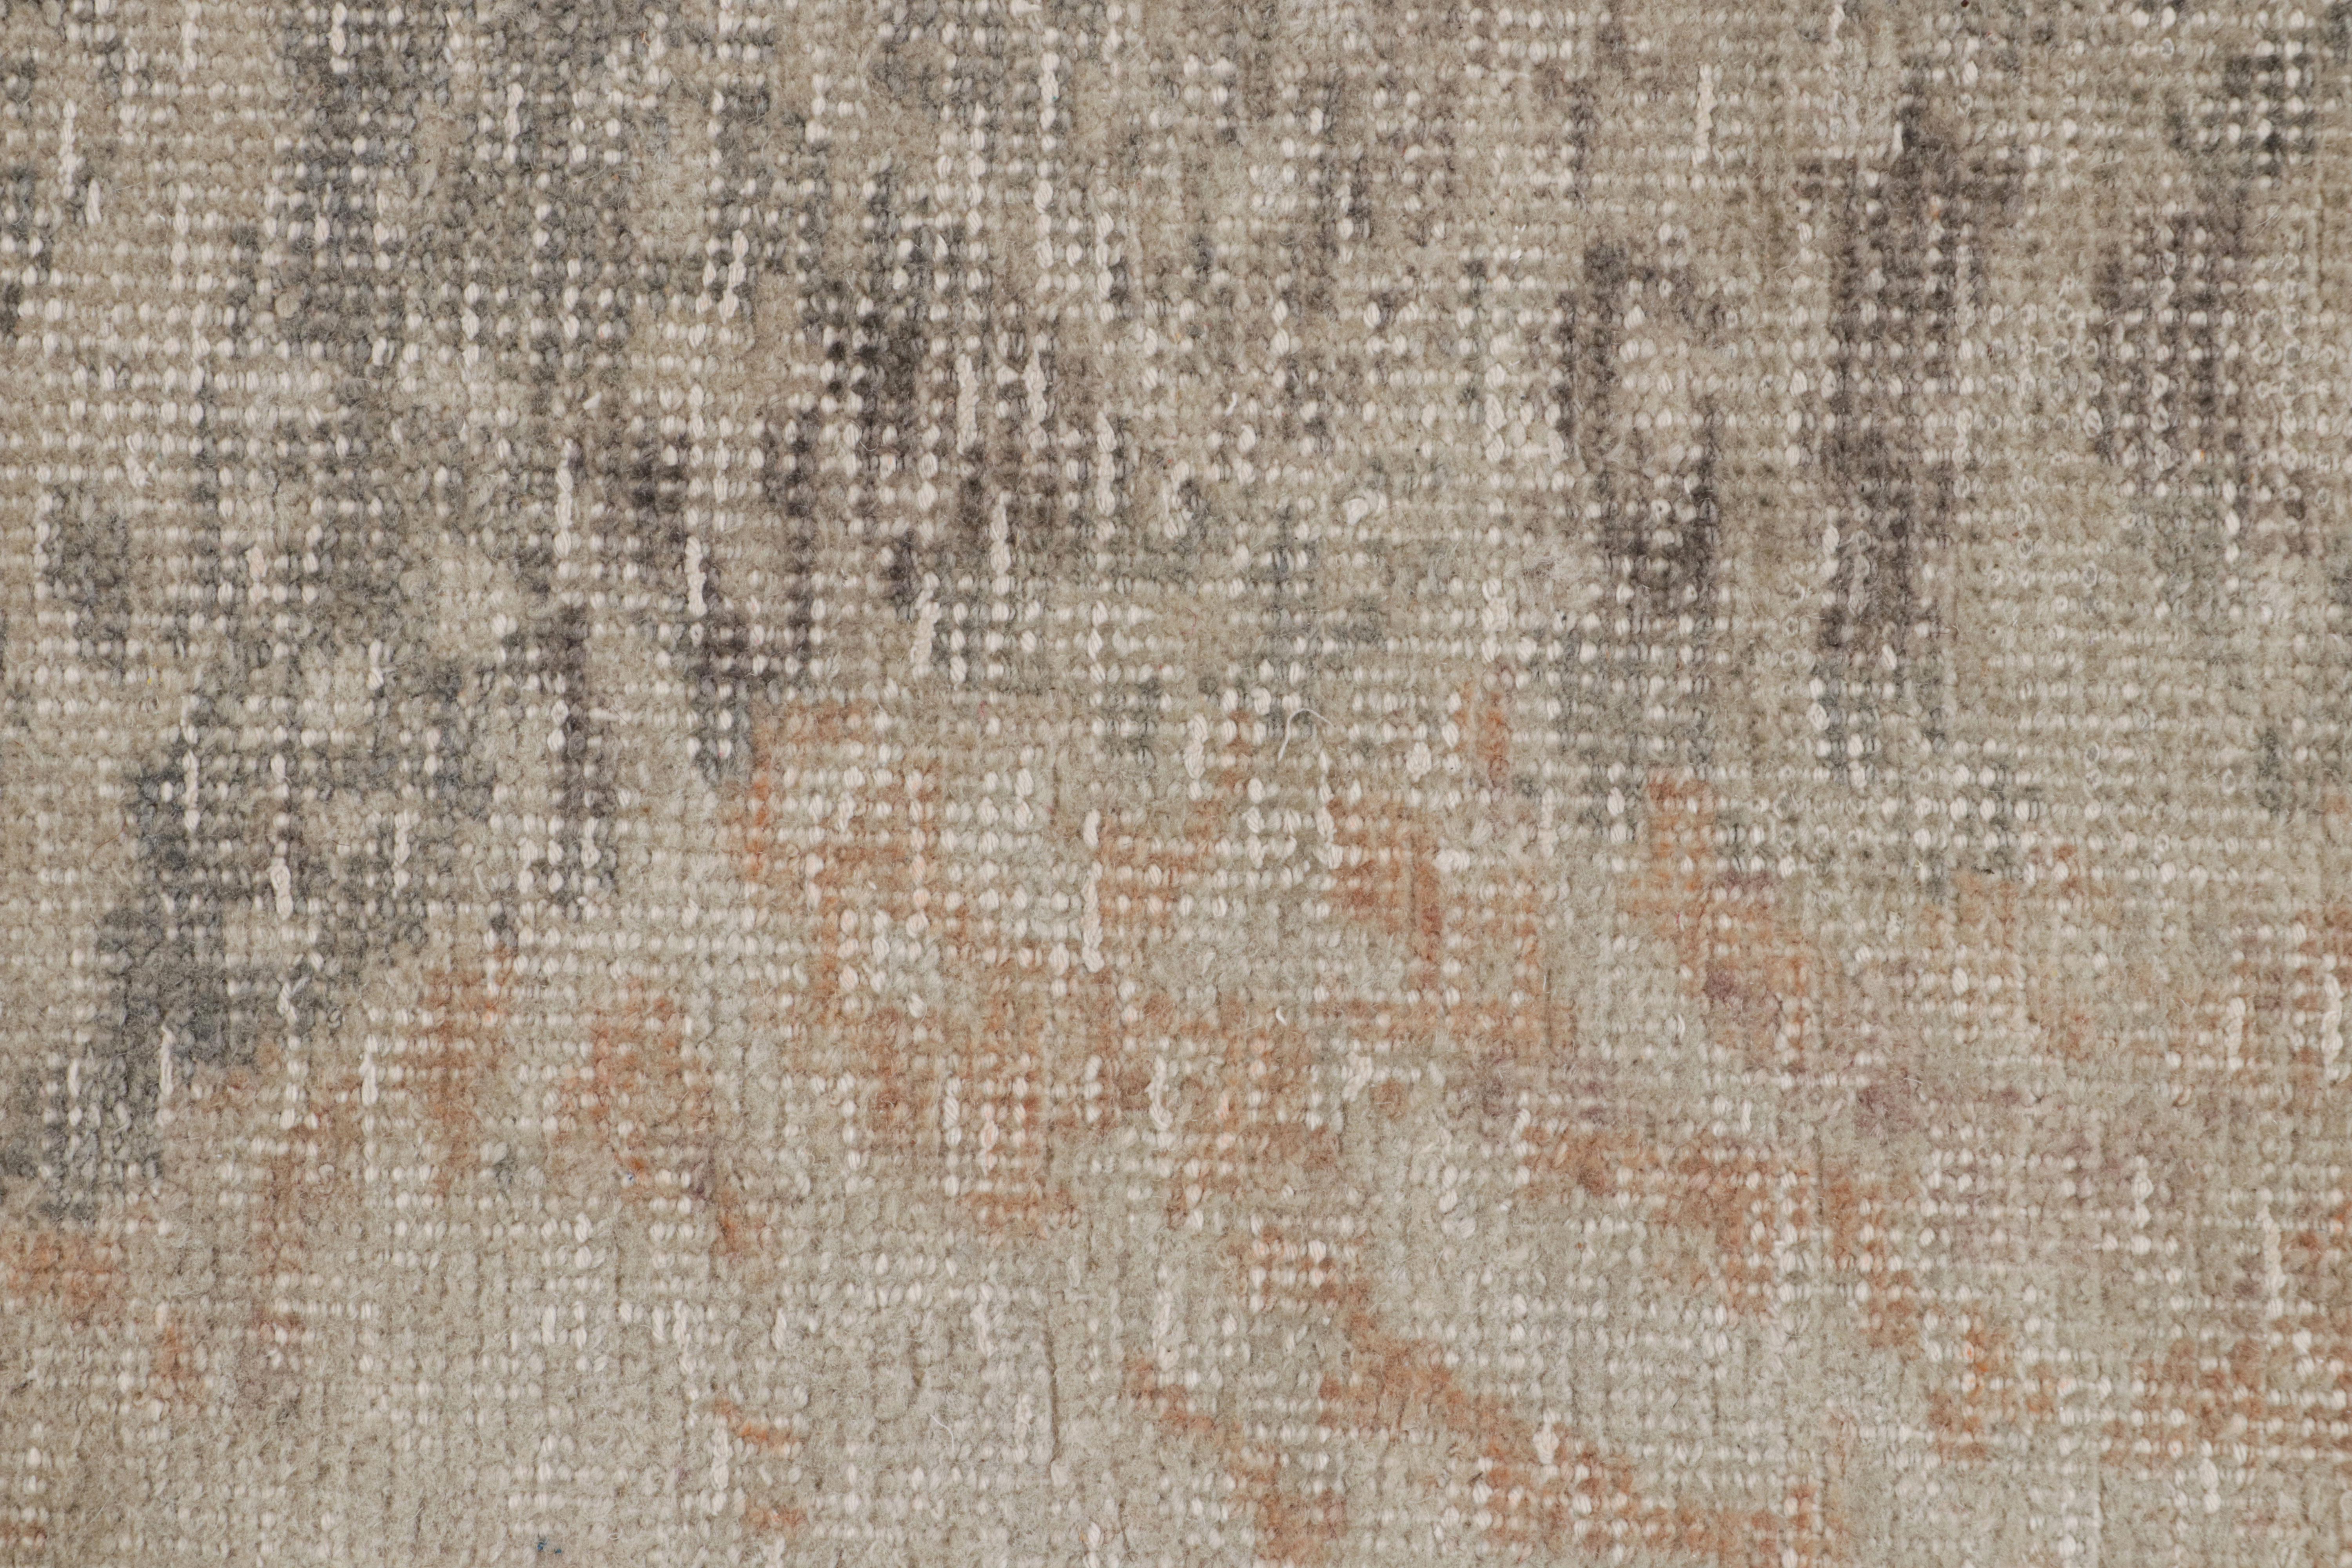 Rug & Kilim's Contemporary Abstract Rug in Taupe and Rust (tapis abstrait contemporain en taupe et rouille) Neuf - En vente à Long Island City, NY